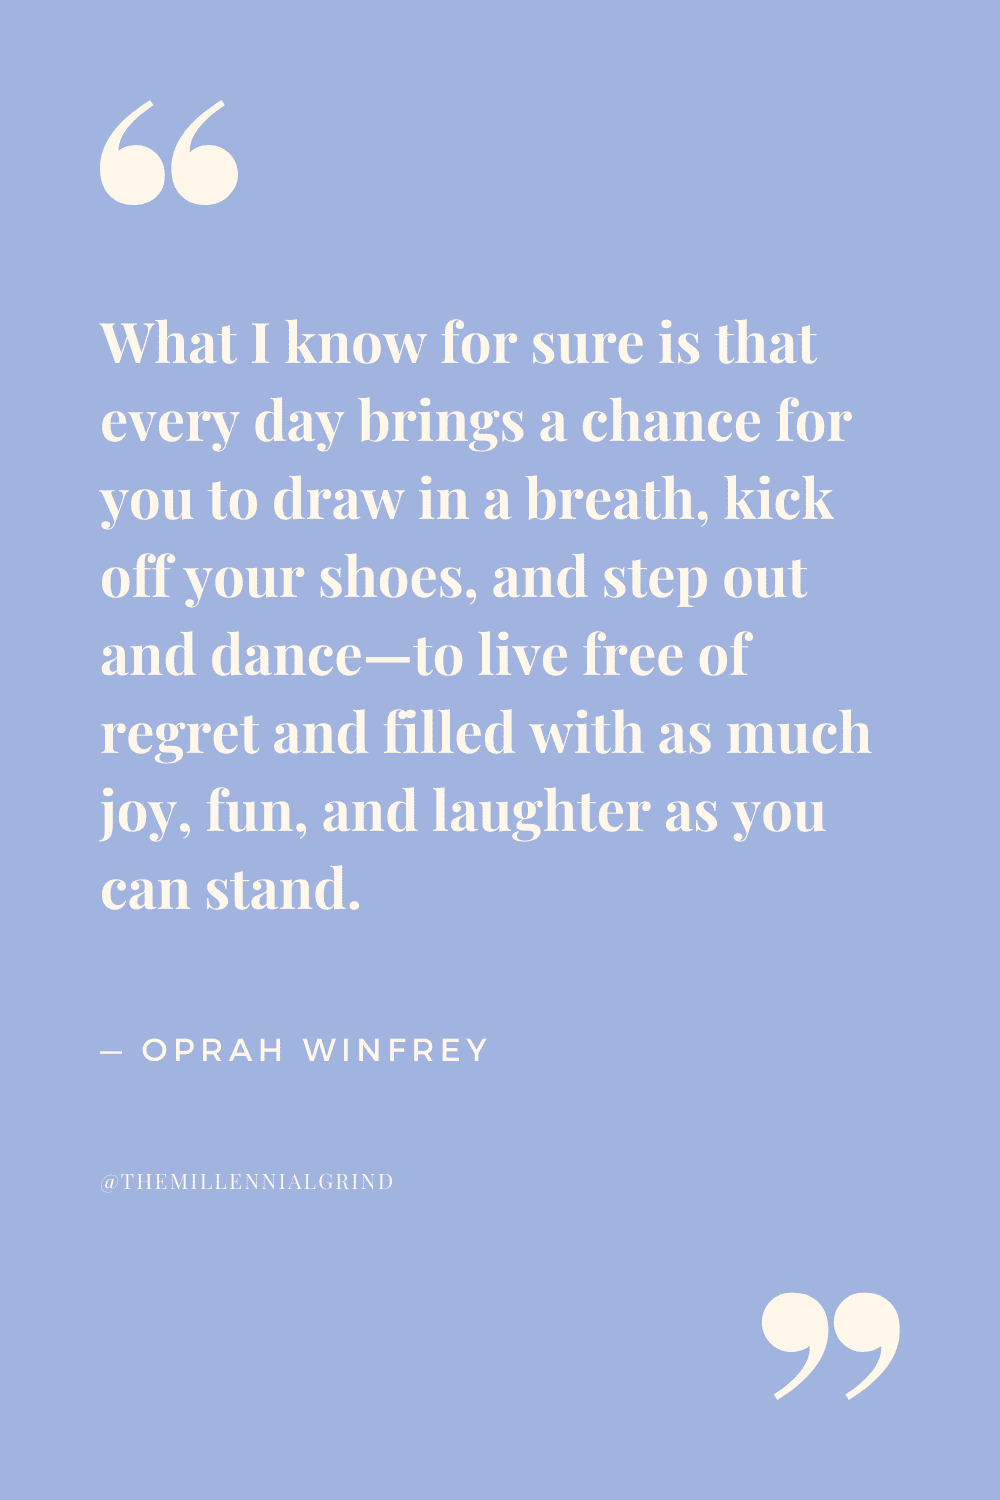 50 Best Quotes from What I Know for Sure by Oprah Winfrey | THE ...